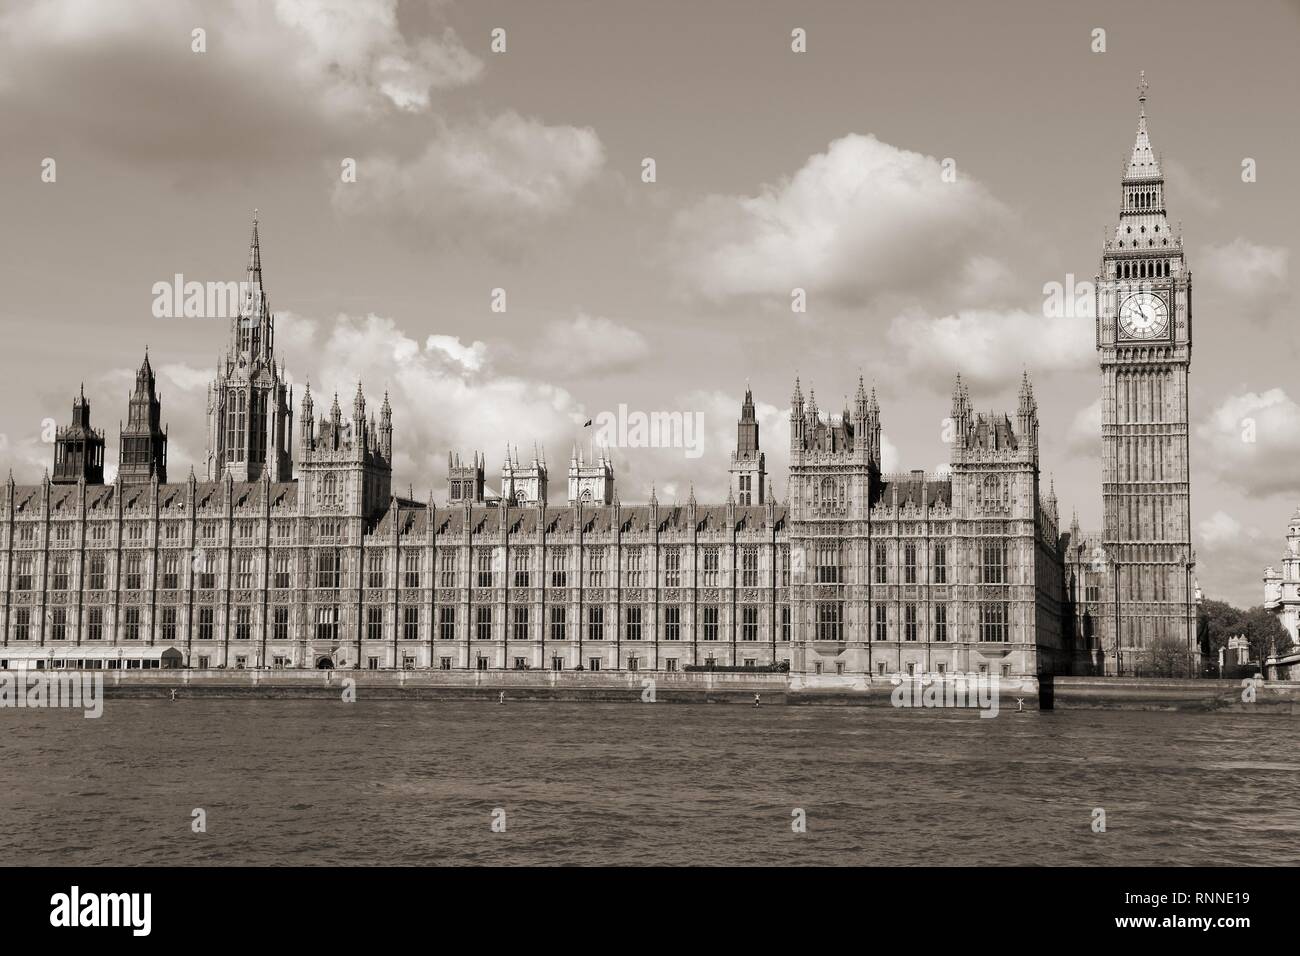 London, United Kingdom - Palace of Westminster (Houses of Parliament) with Big Ben clock tower. UNESCO World Heritage Site. Sepia tone - filtered retr Stock Photo